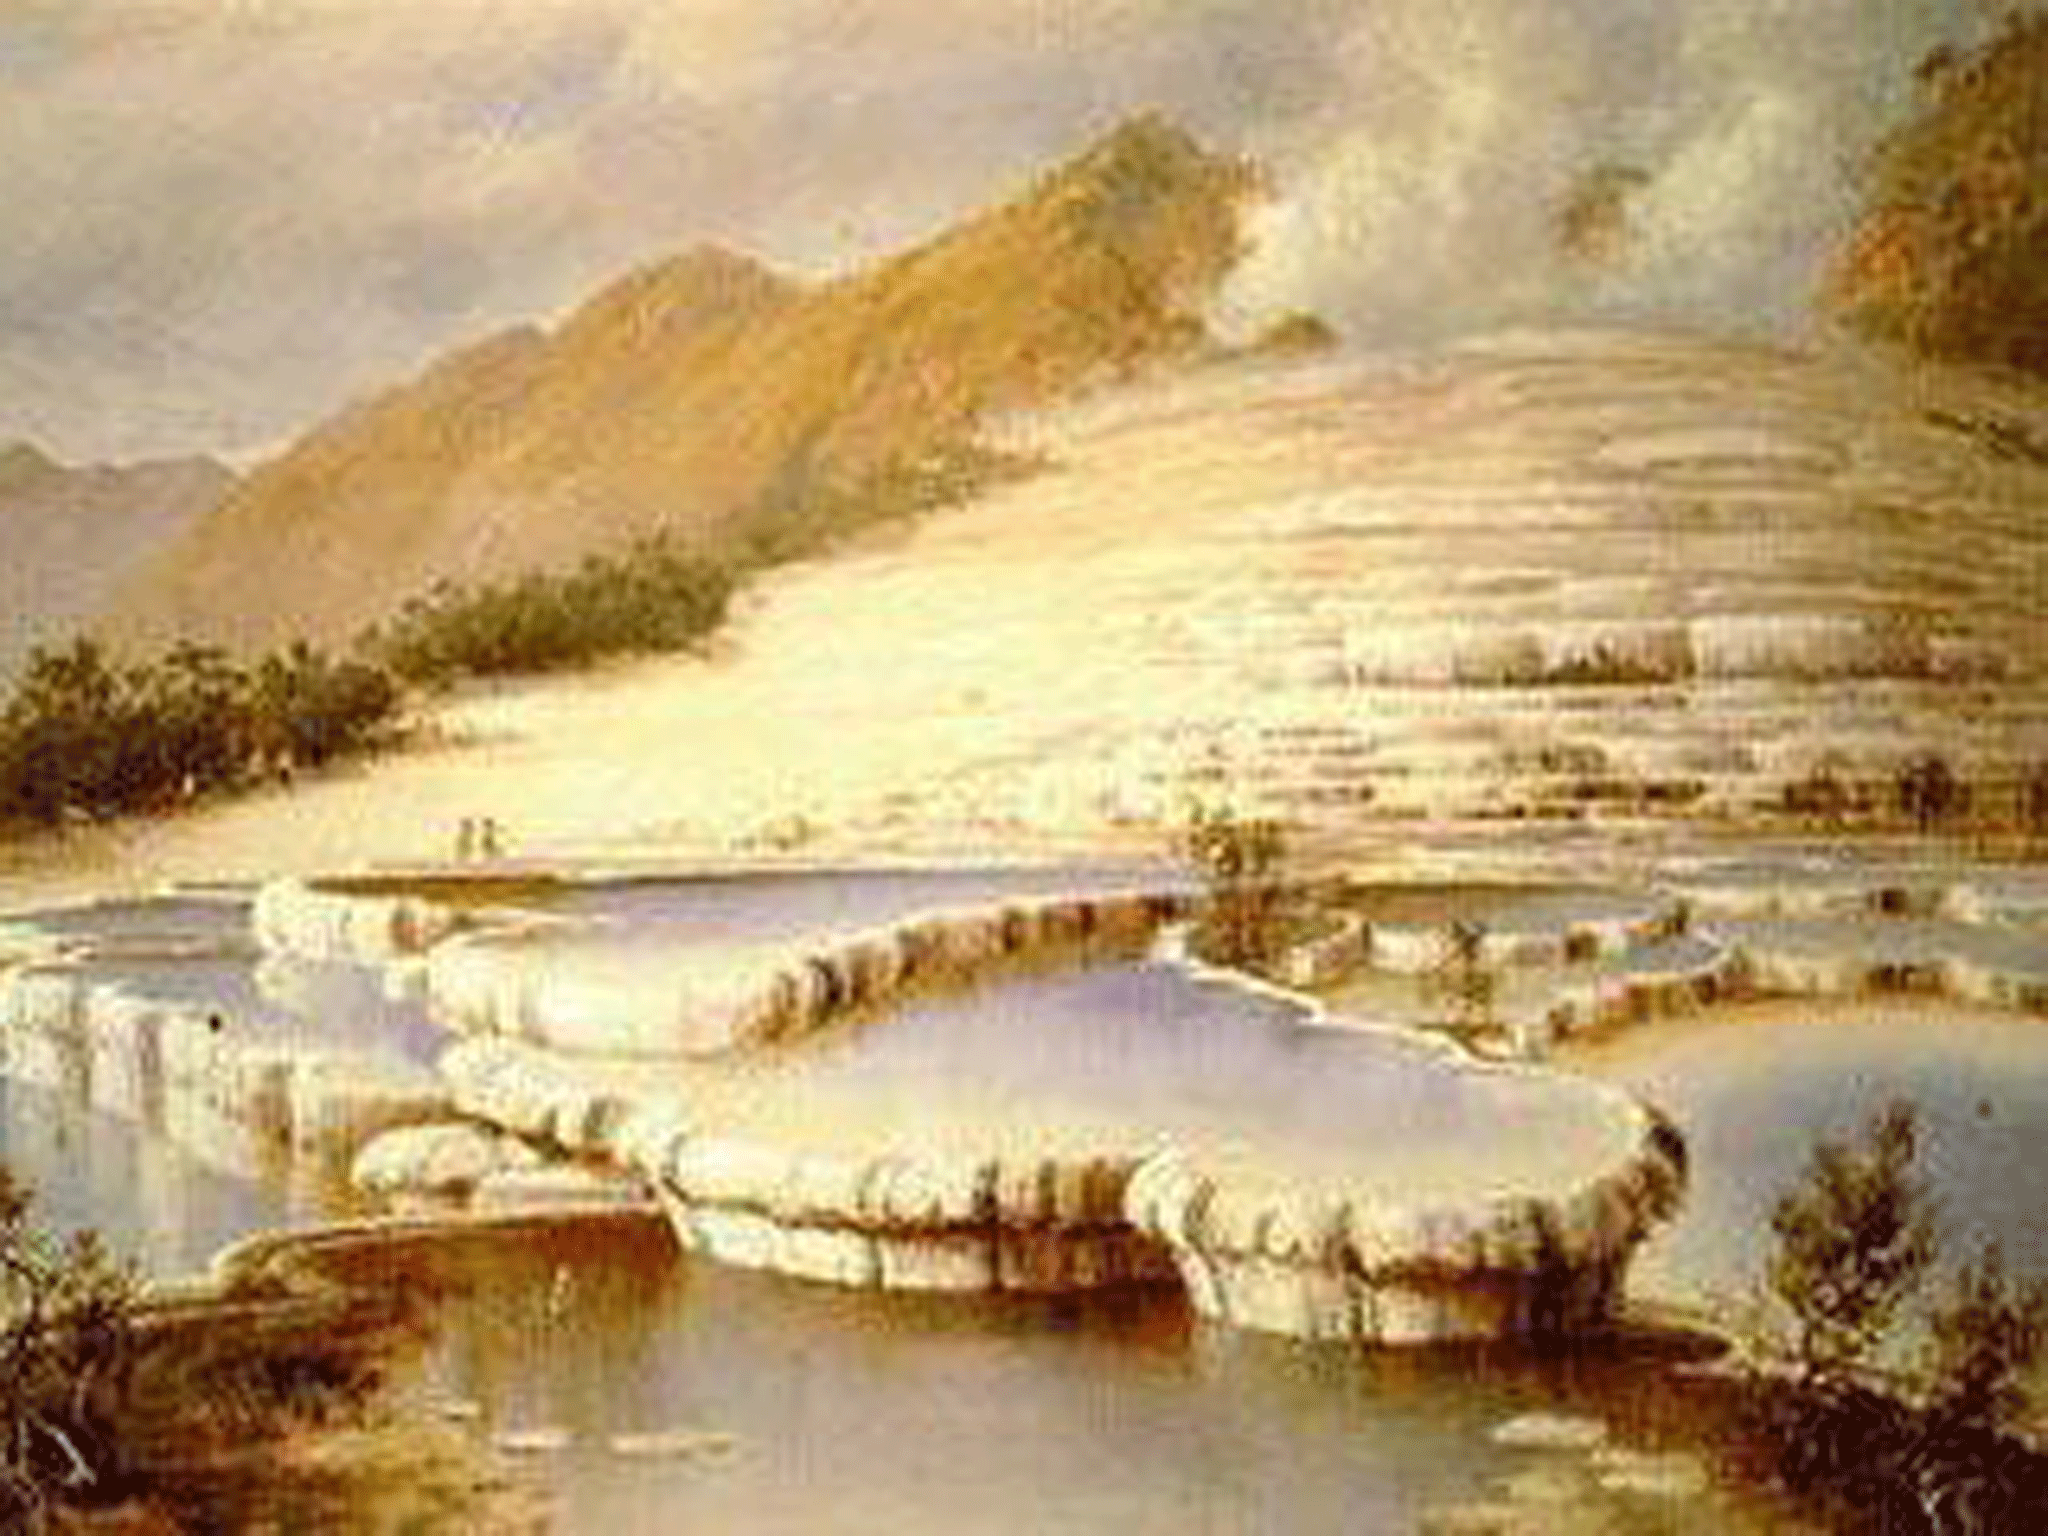 ‘The White Terraces’ (1884) by New Zealand artist Charles Blomfield, painted two years before the eruption that is thought to have buried them